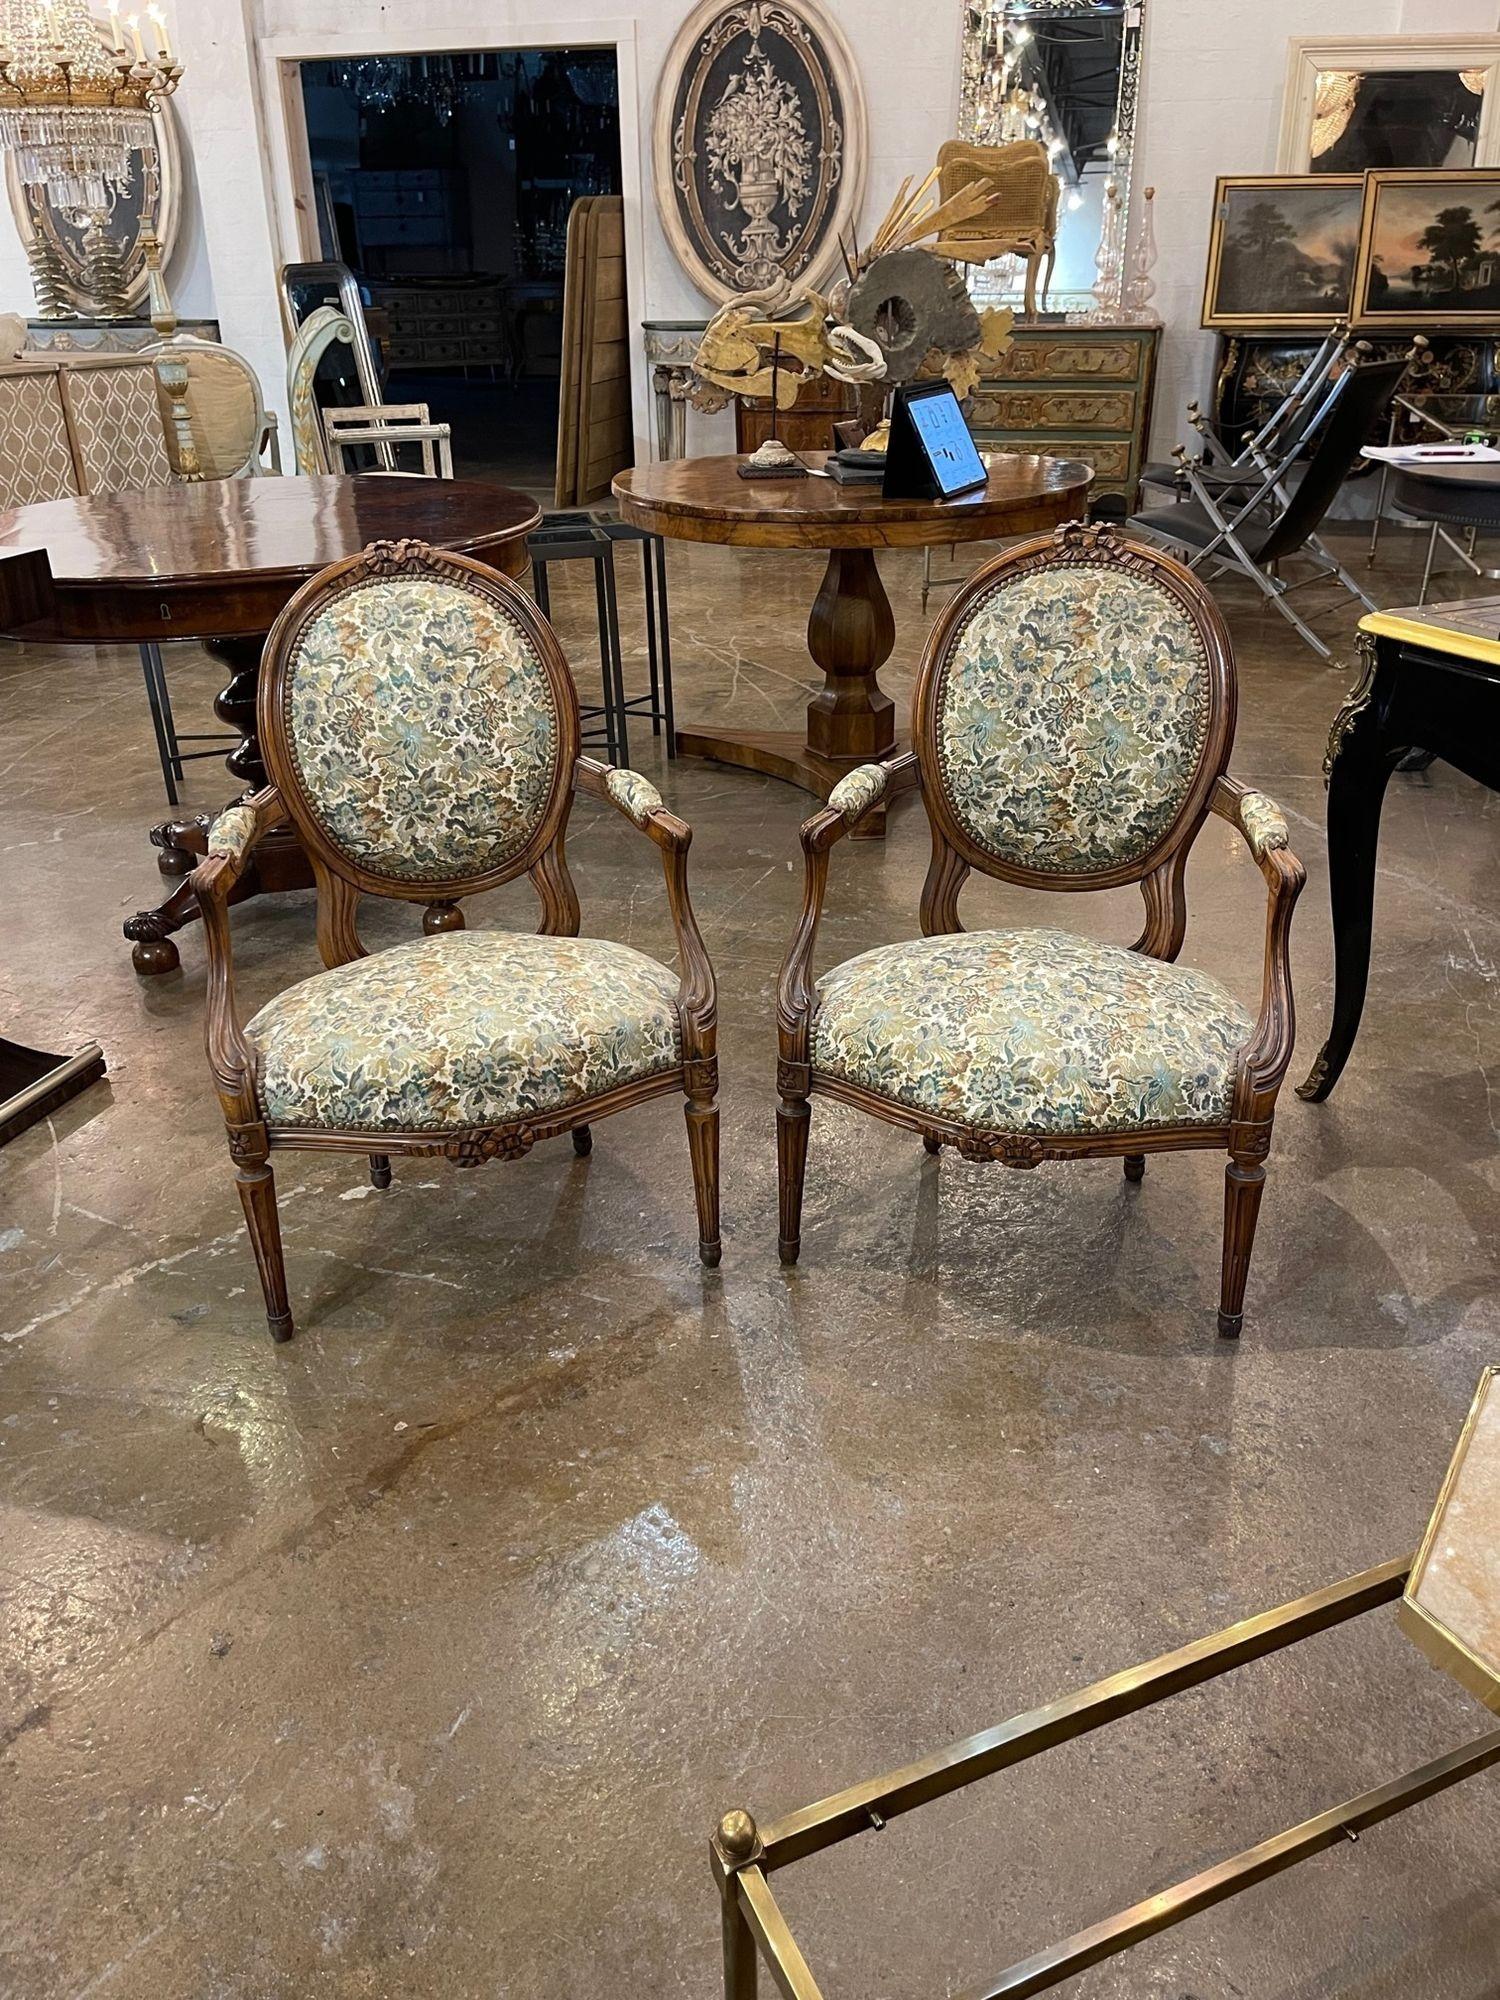 Lovely late 19th century French Provincial carved walnut armchairs. Upholstered in a beautiful floral pattern. Very nice!!